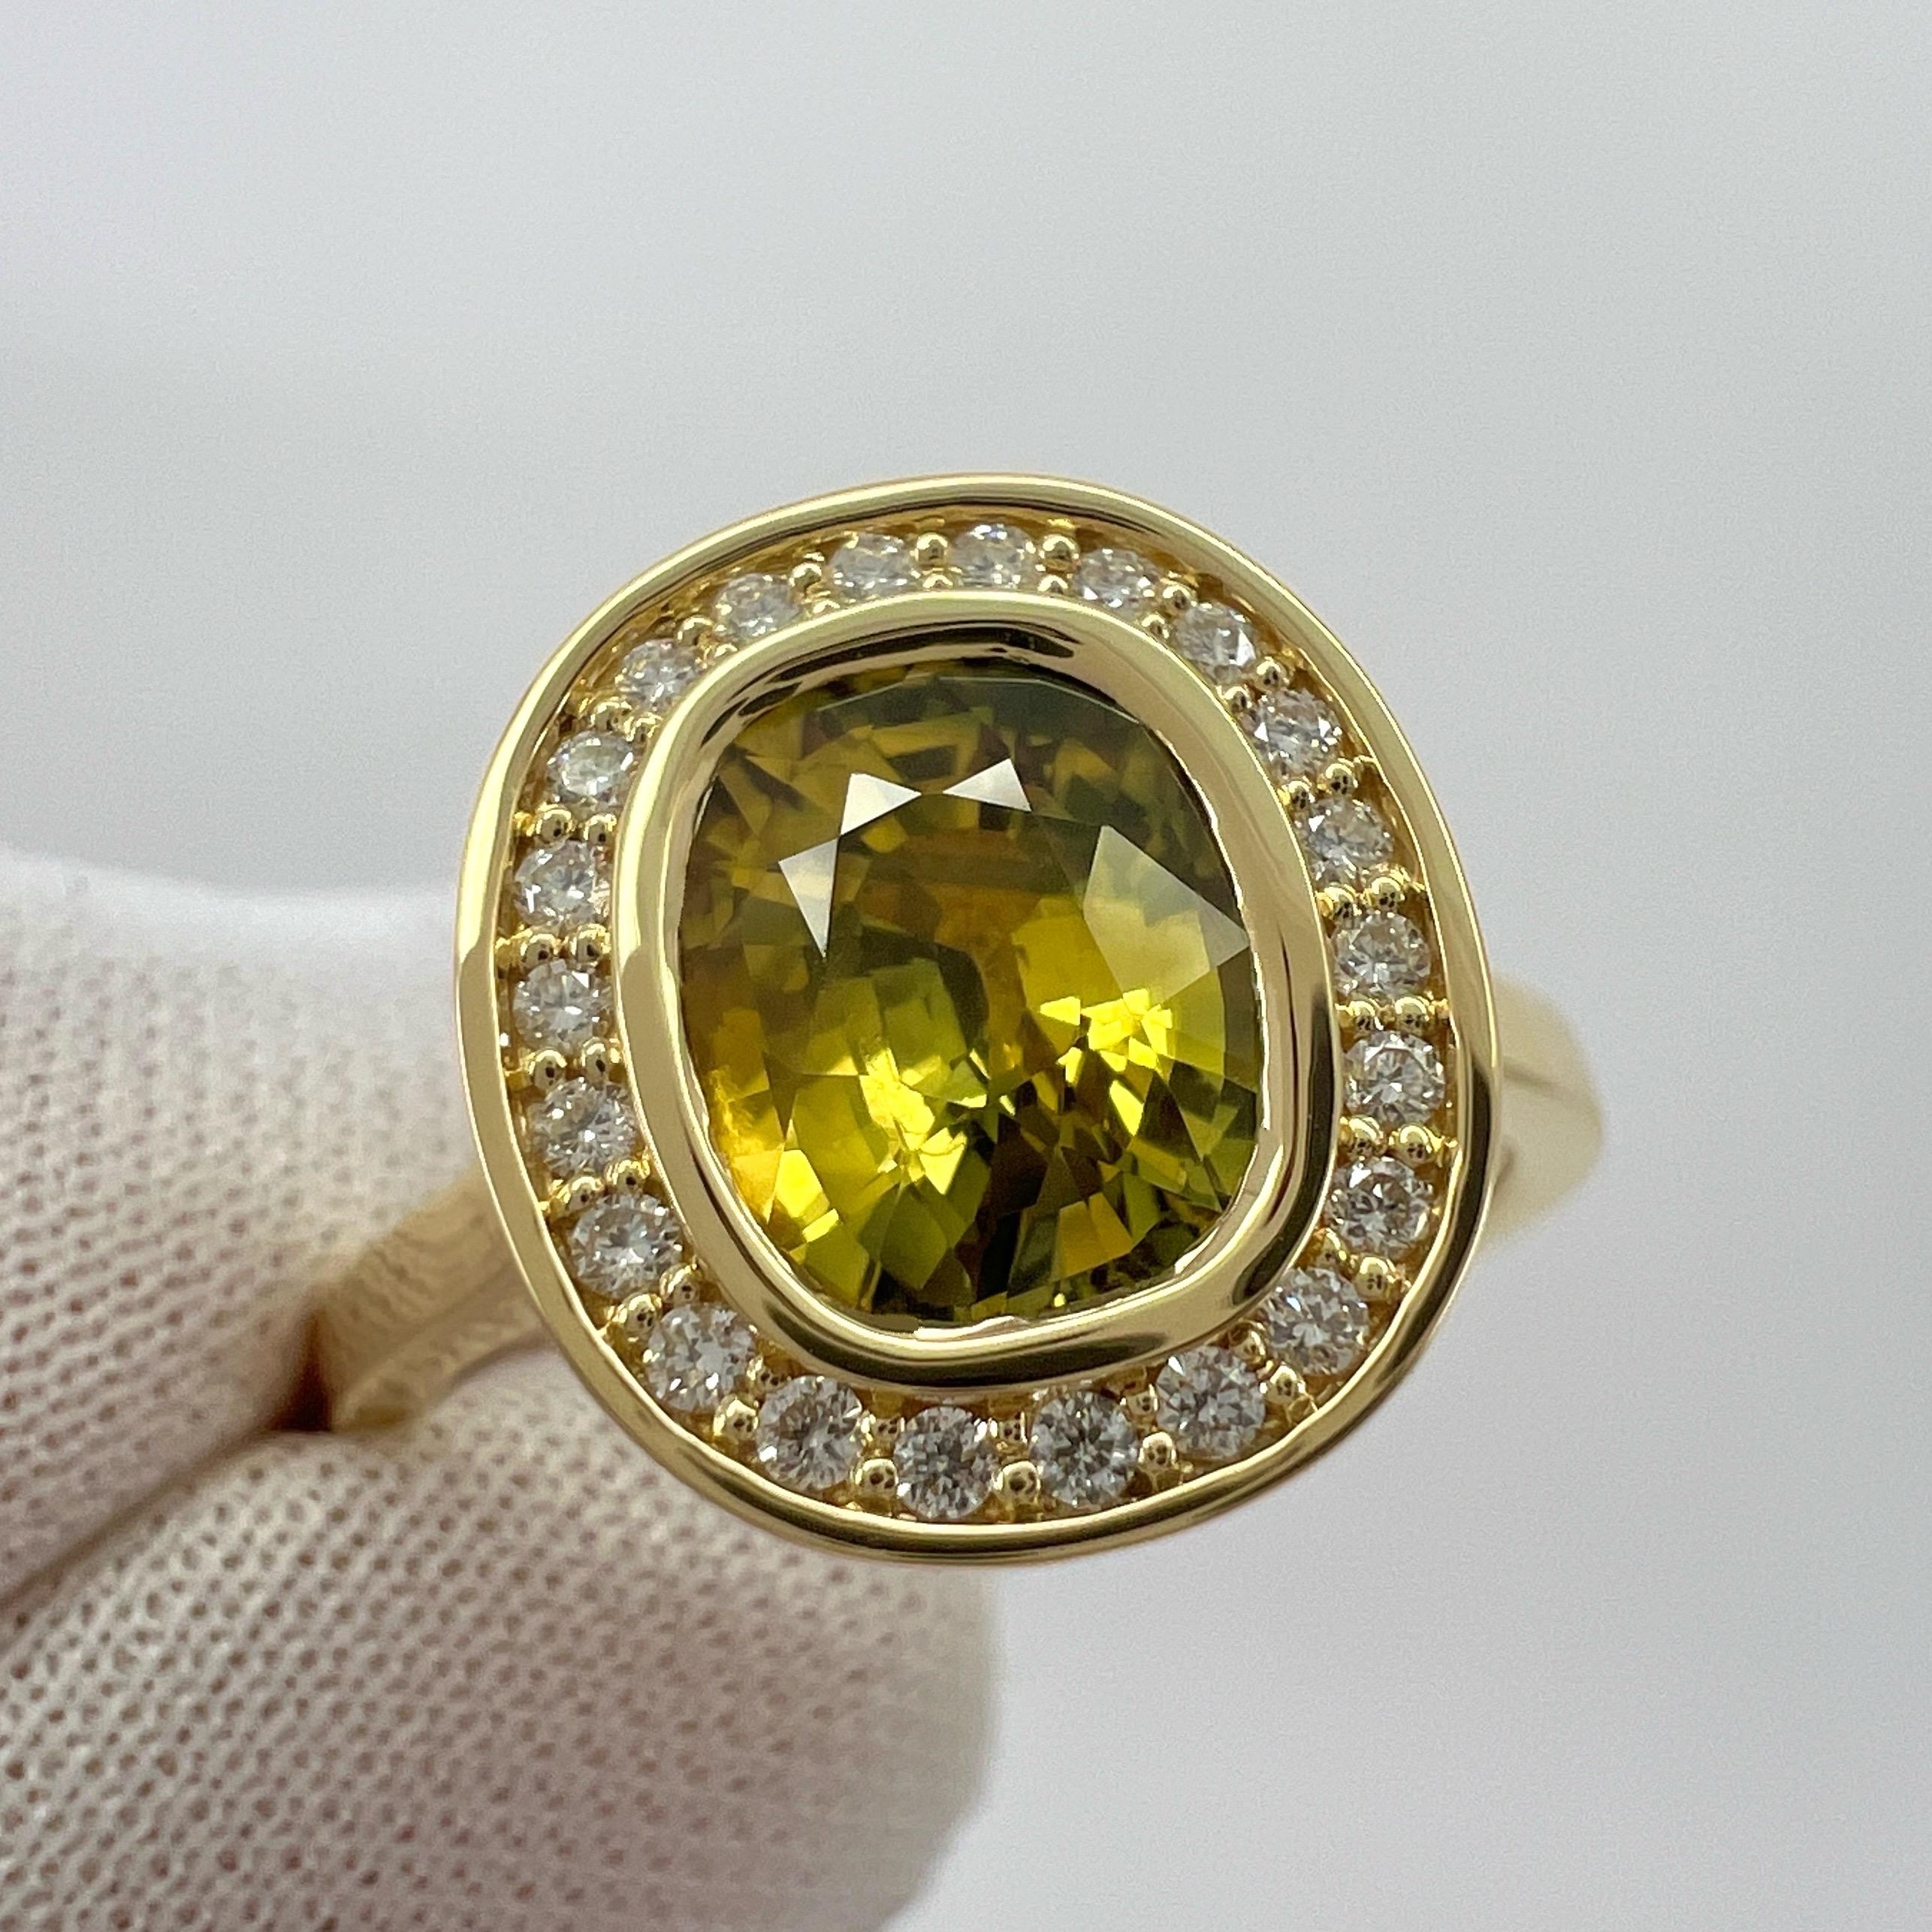 Unique GIA Certified Untreated Vivid Yellow Sapphire & Diamond 18k Yellow Gold Halo Ring

Fine 2.12 carat natural sapphire with a fine vivid yellow colour and an excellent oval cut. This sapphire is fully certified by GIA confirming the sapphire as